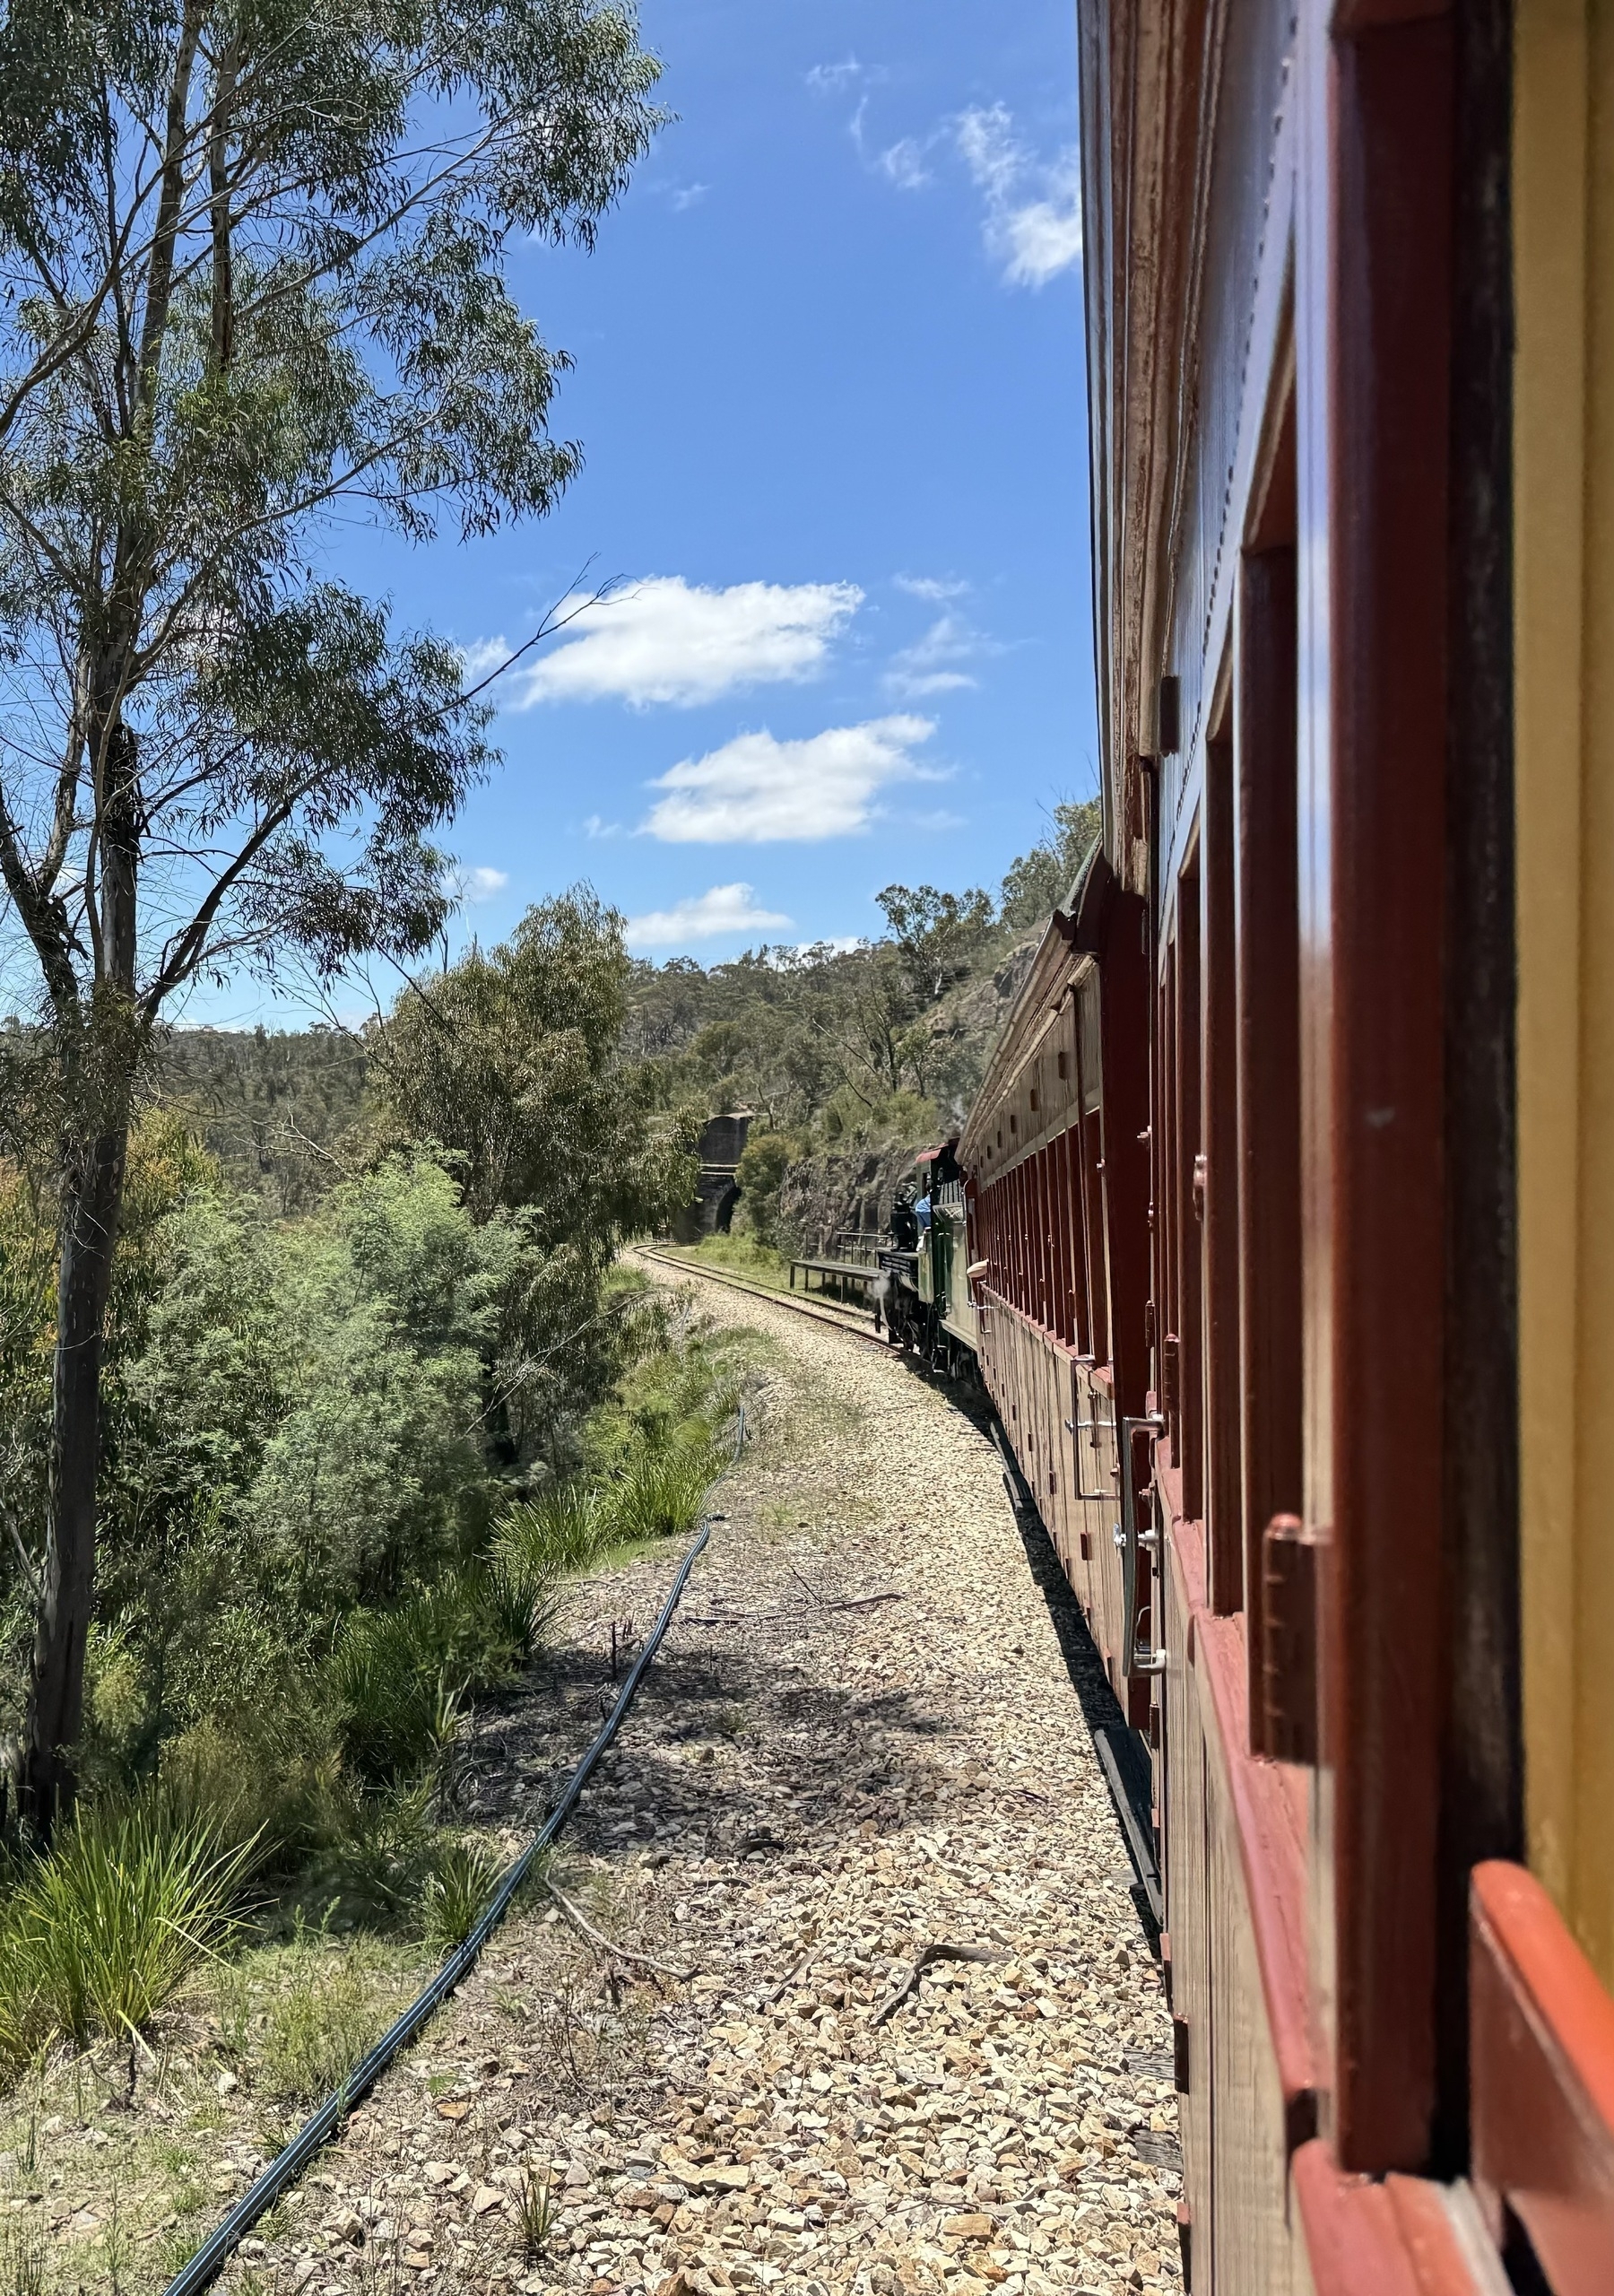 Looking along the side of a train towards the steam locomotive at the front. In the distance is the entrance to a tunnel.